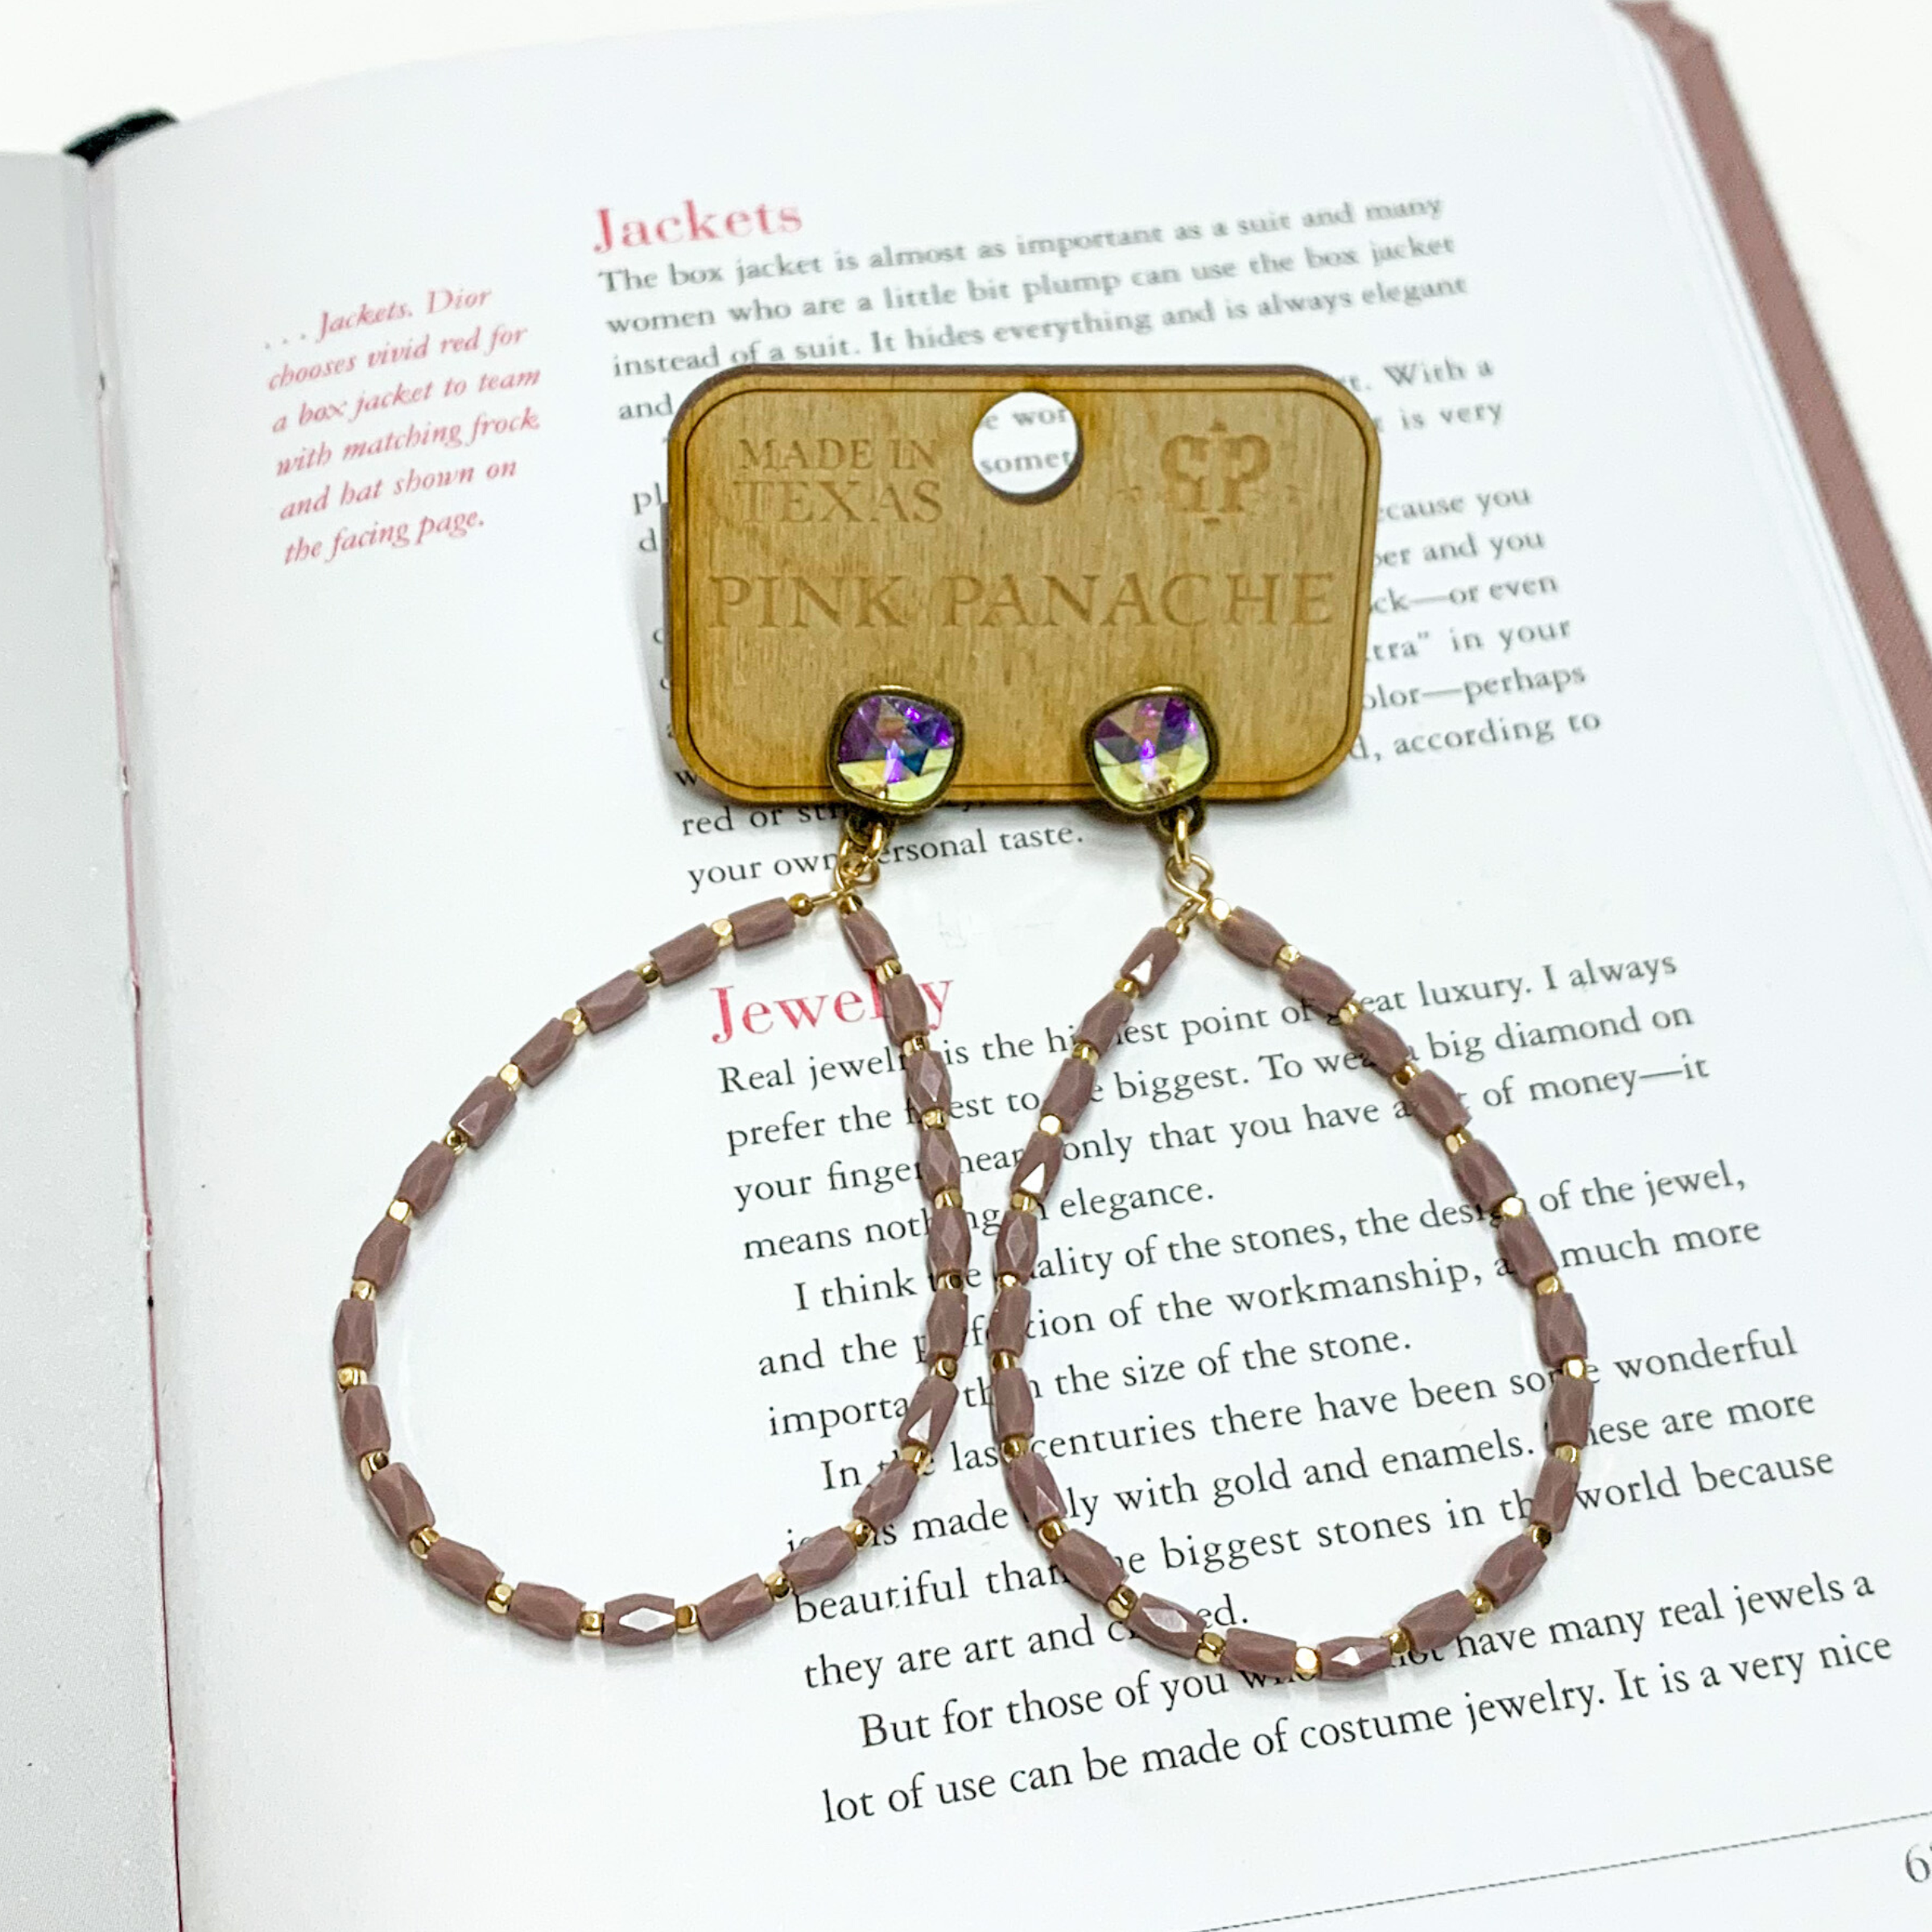 Ab cushion cut crystals with a hanging teardrop. The teardrop has lavender and gold beads. This pair of earrings are pictured on an open book. 